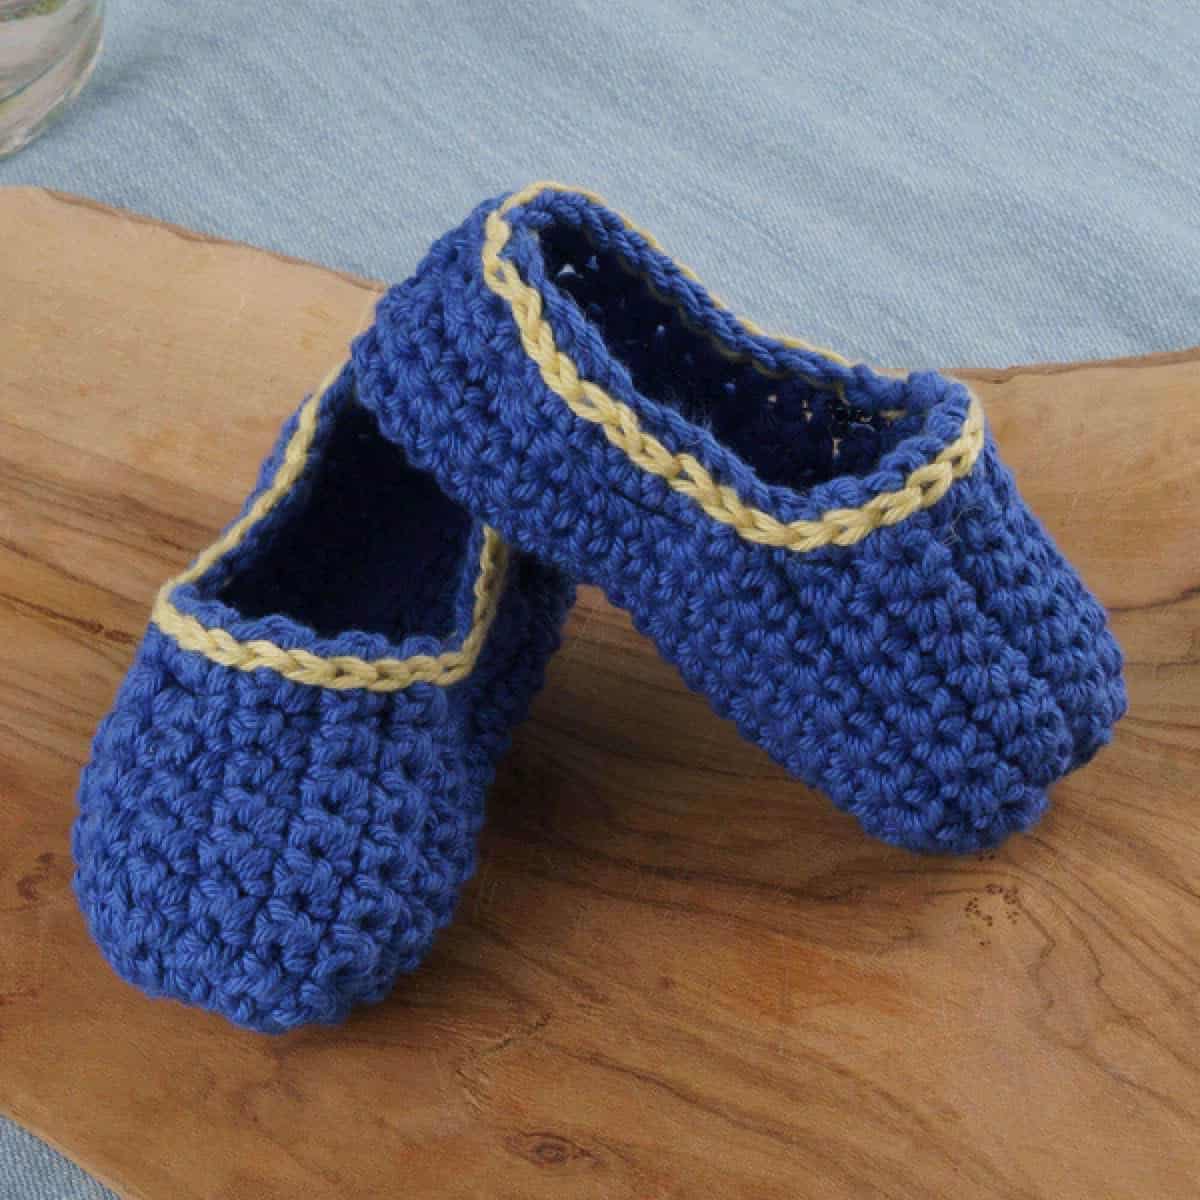 Crochet Baby Booties with Stitch Trim Pattern